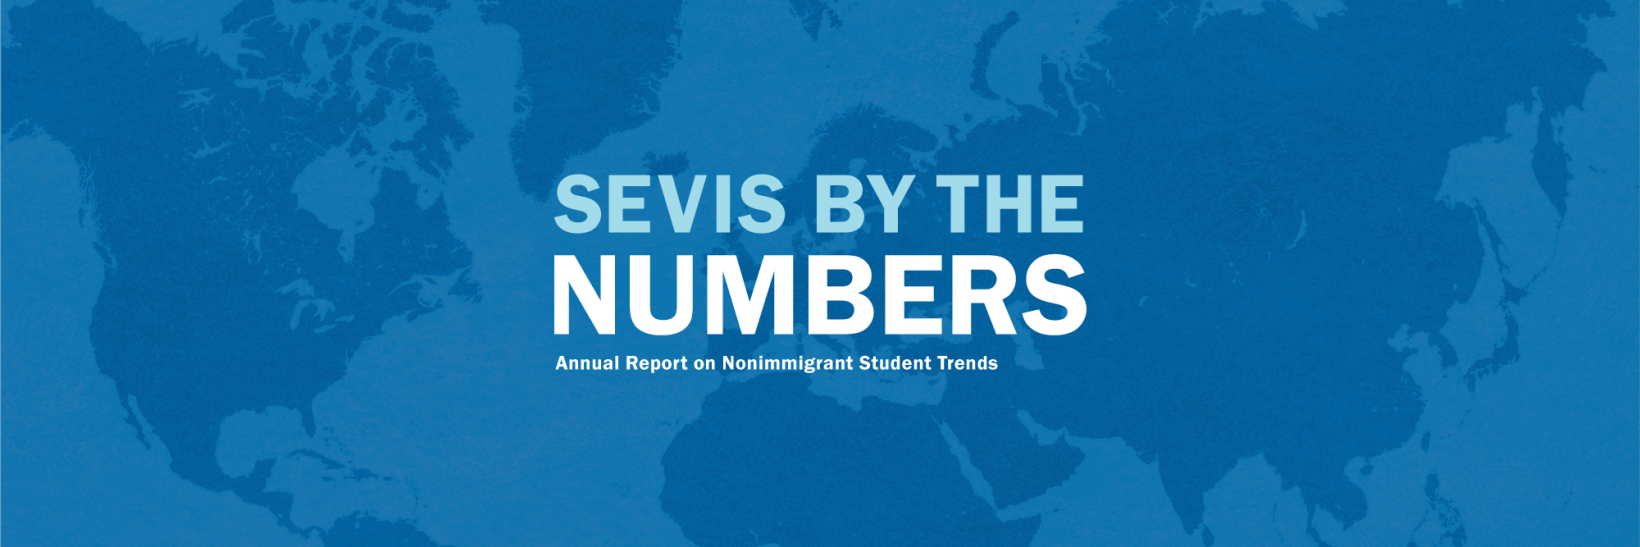 SEVIS by the Numbers